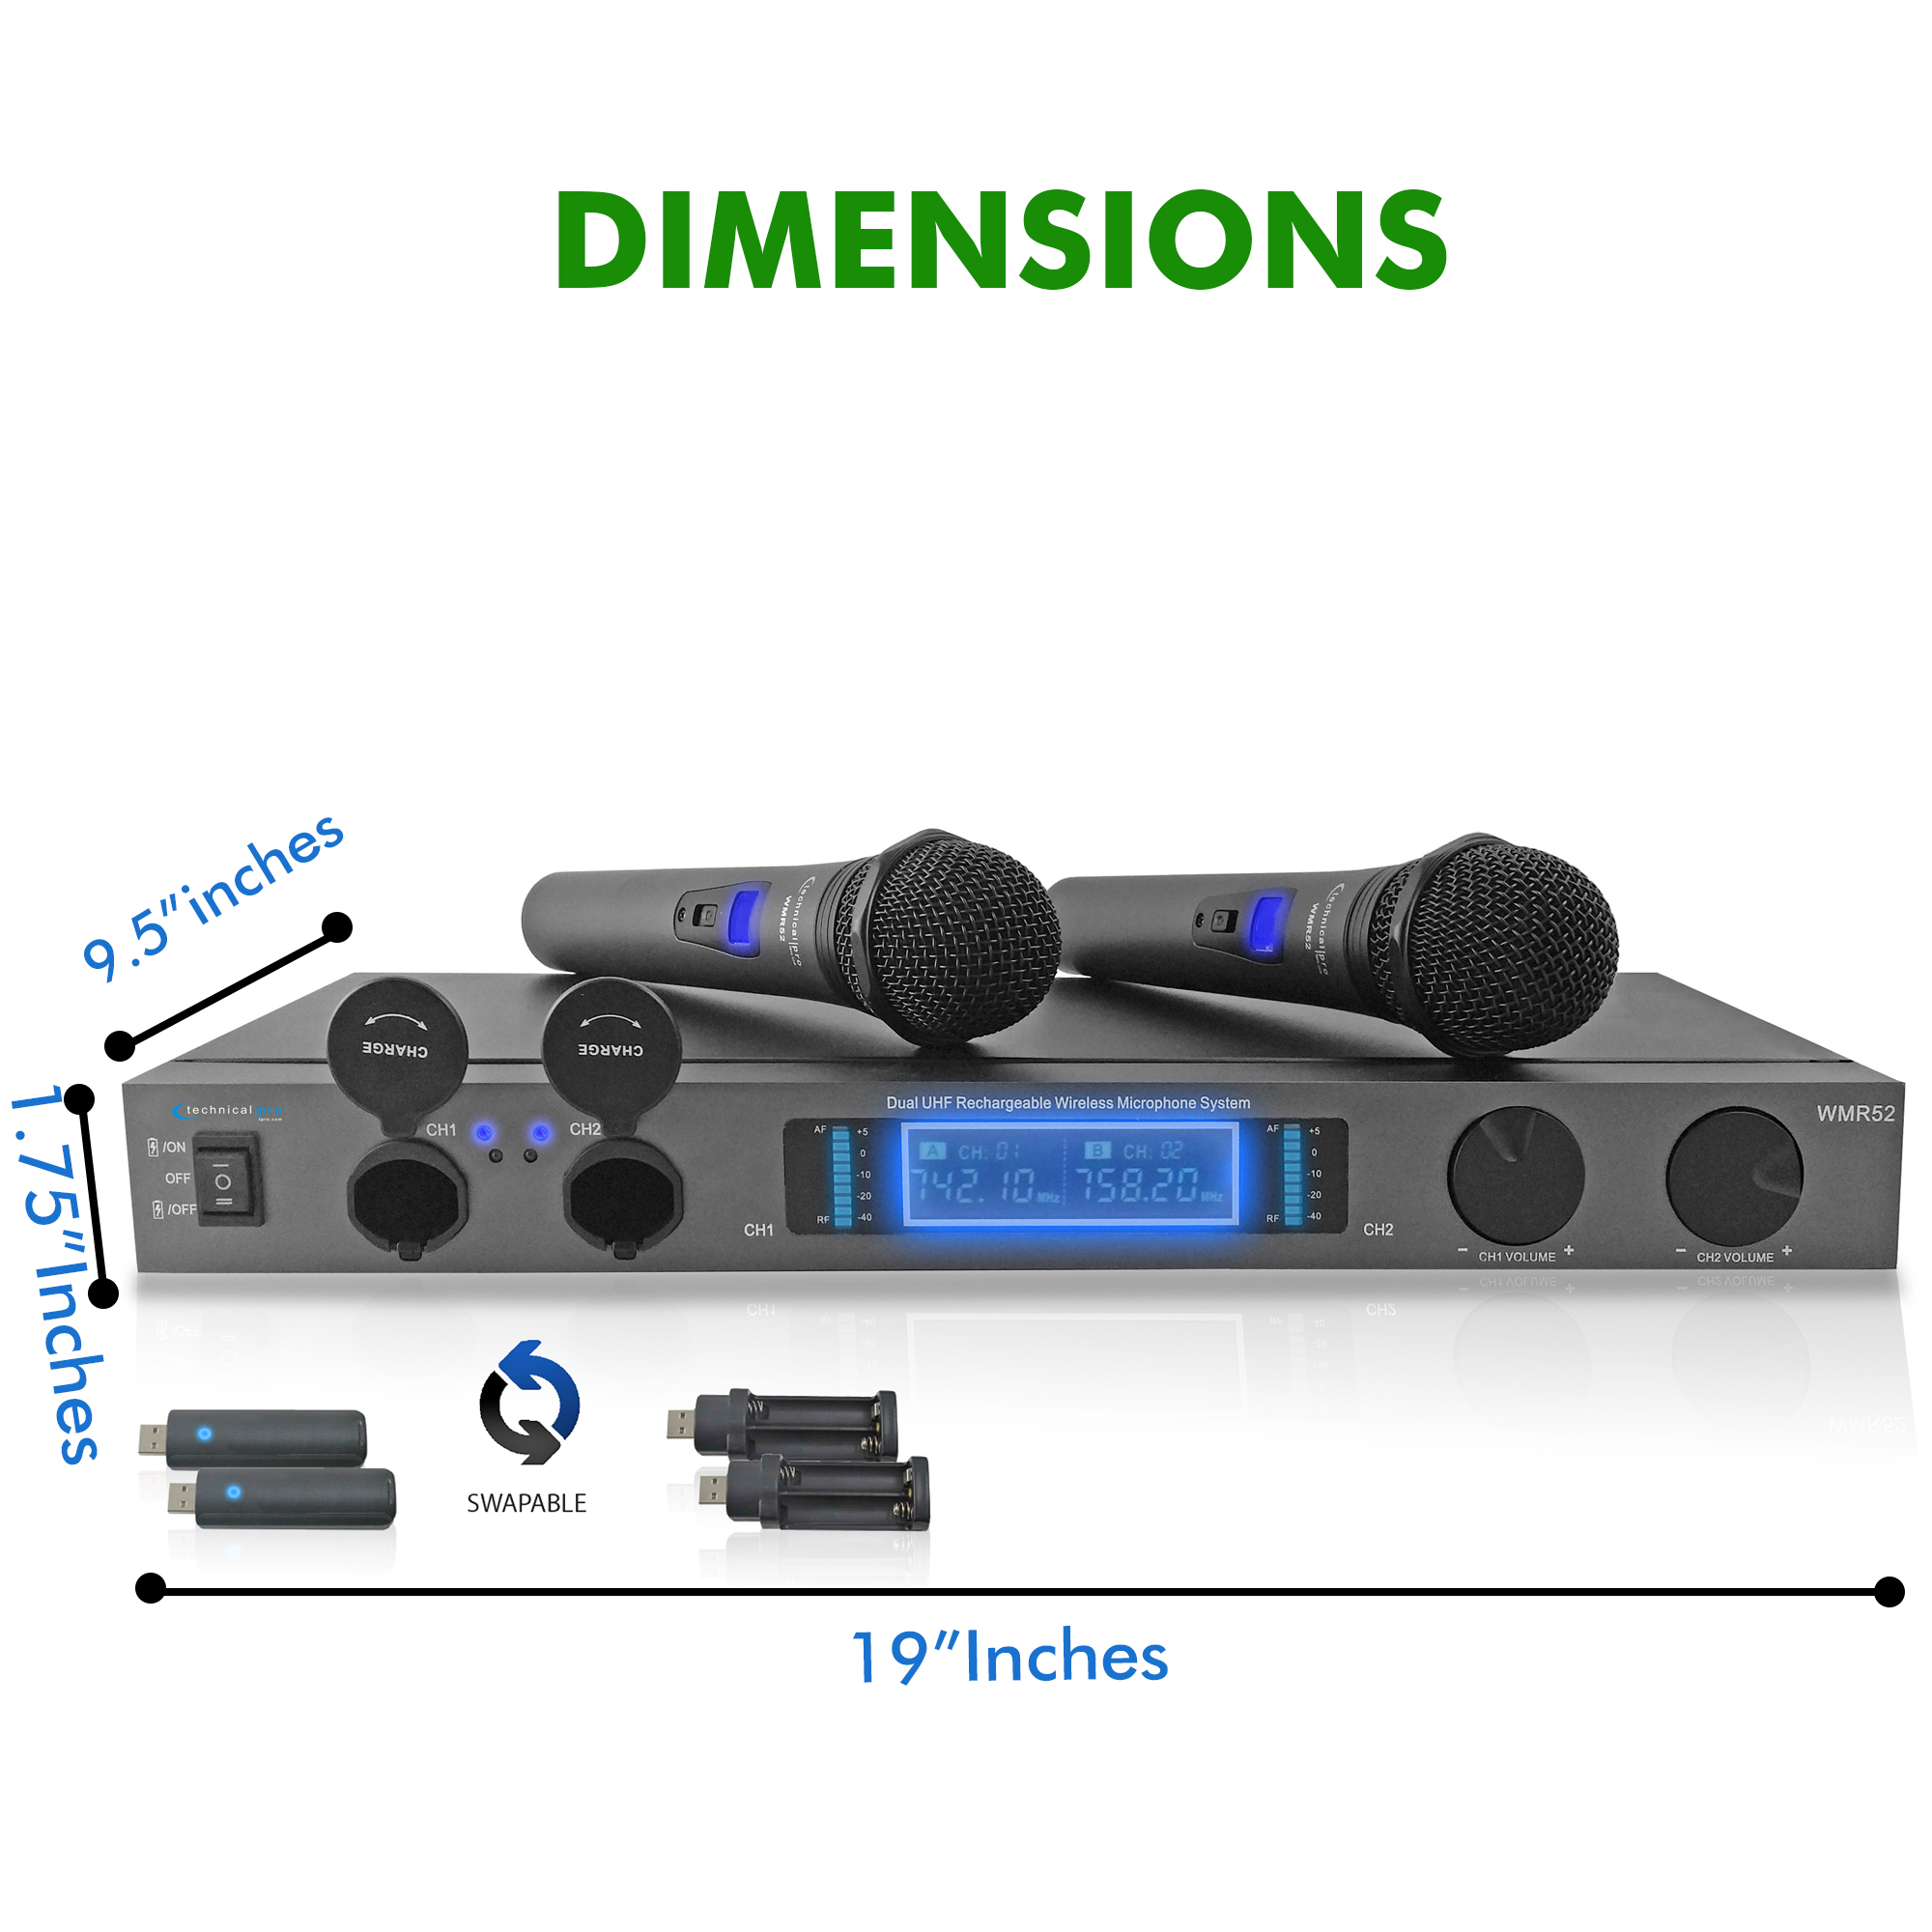 Technical Pro Professional Dual UHF Rechargeable Wireless Microphone System, Two Cordless Handheld Microphones, For Home Karaoke, DJ Party